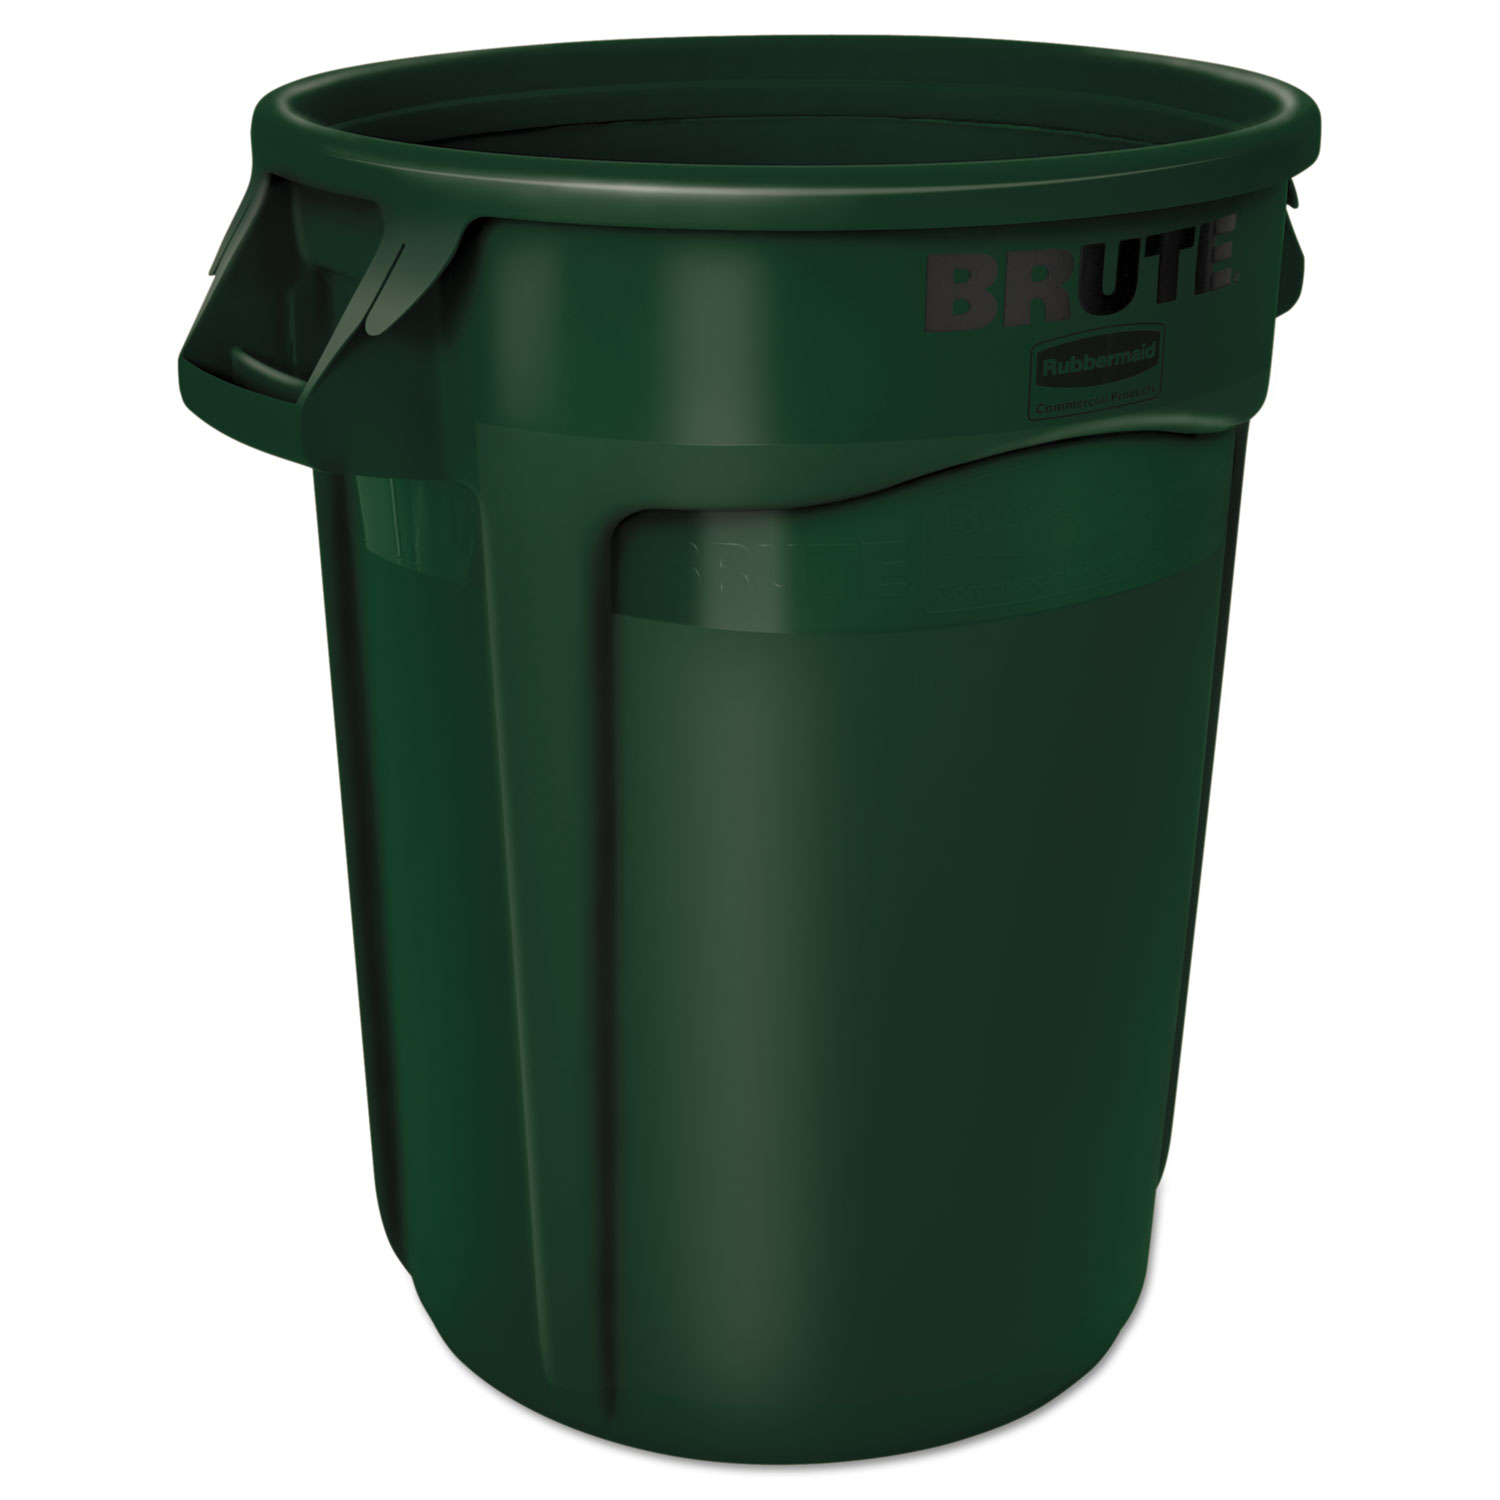  Rubbermaid Commercial FG263200DGRN Round Brute Container, Plastic, 32 gal, Dark Green (RCP2632DGR) 